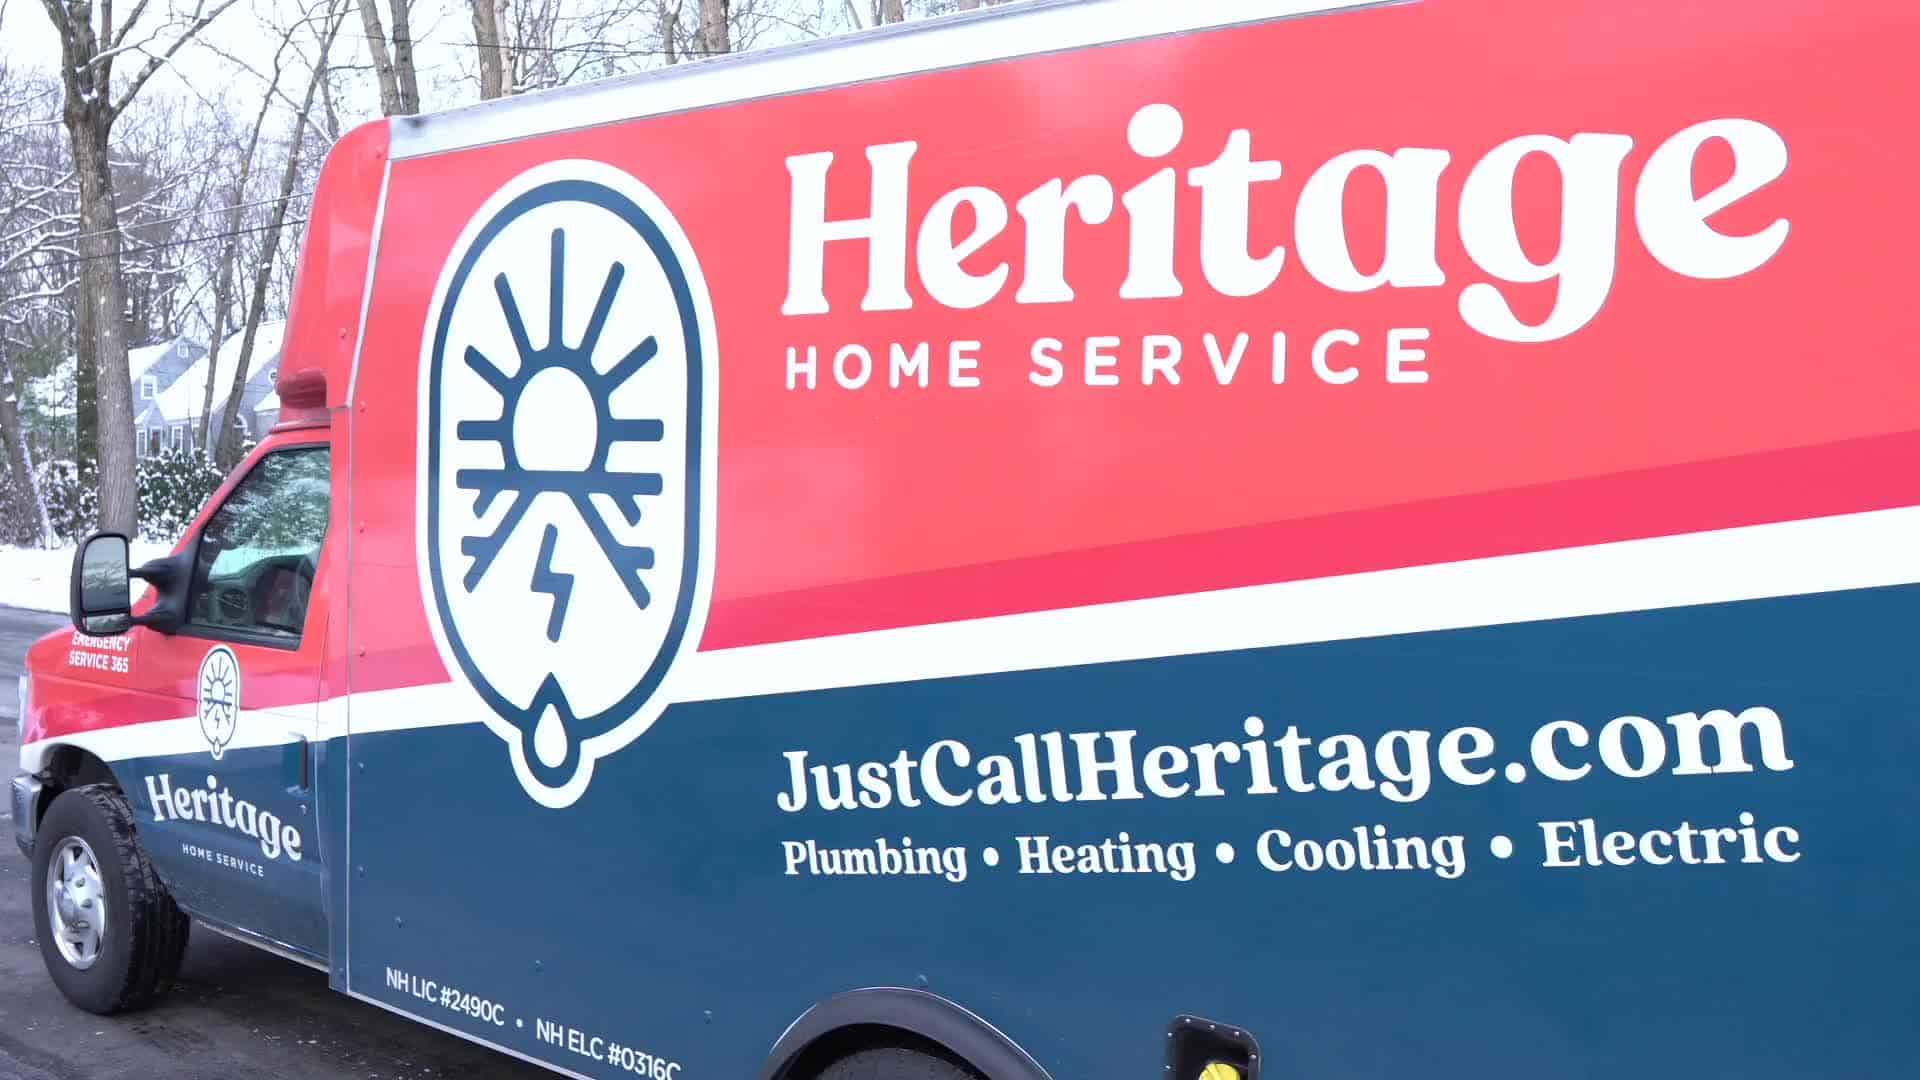 logo of heritage home service on side of truck